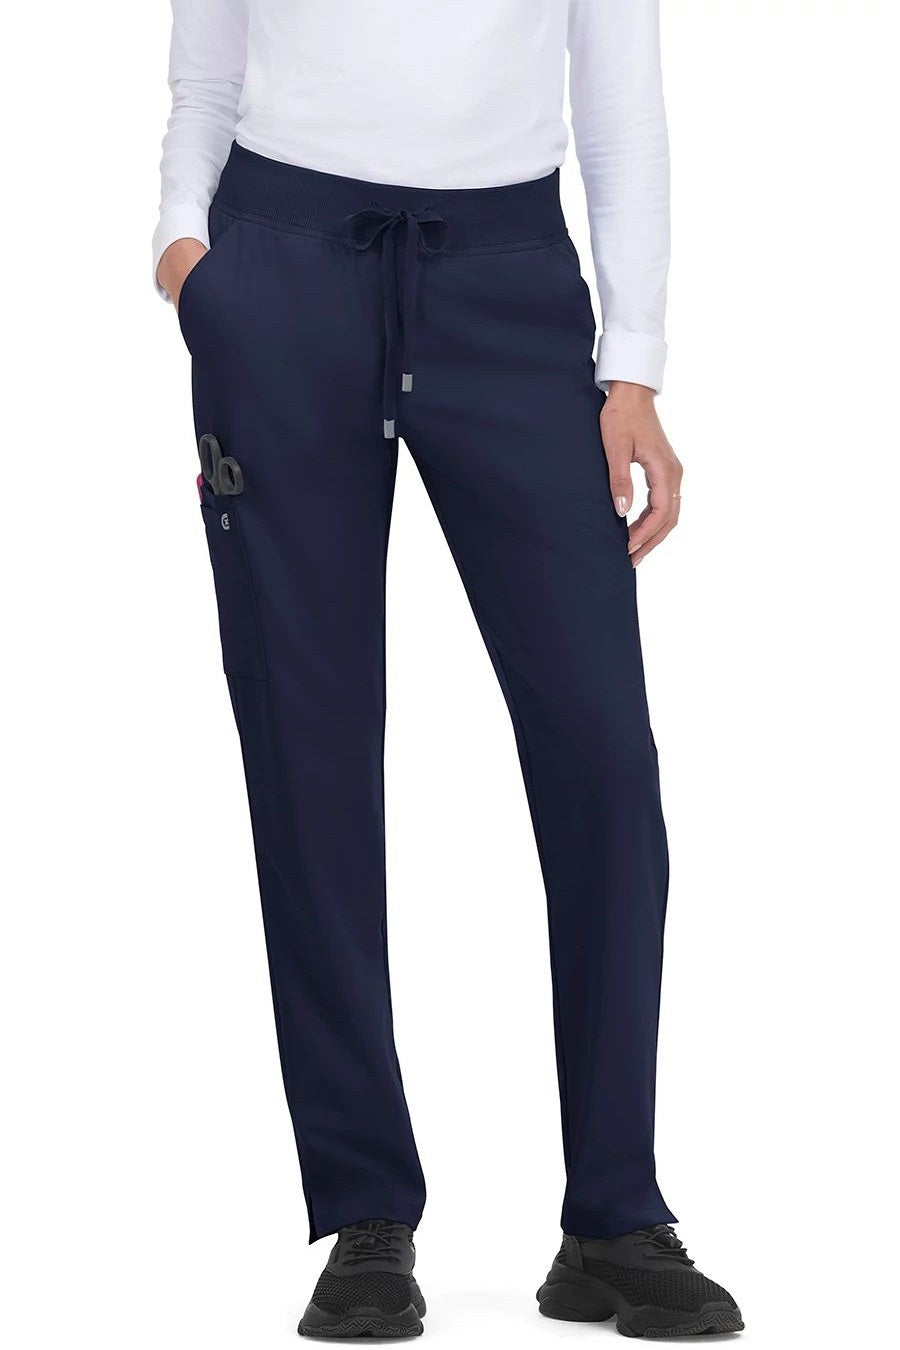 koi Scrub Pants Cureology Atria in Navy at Parker's Clothing and Shoes.